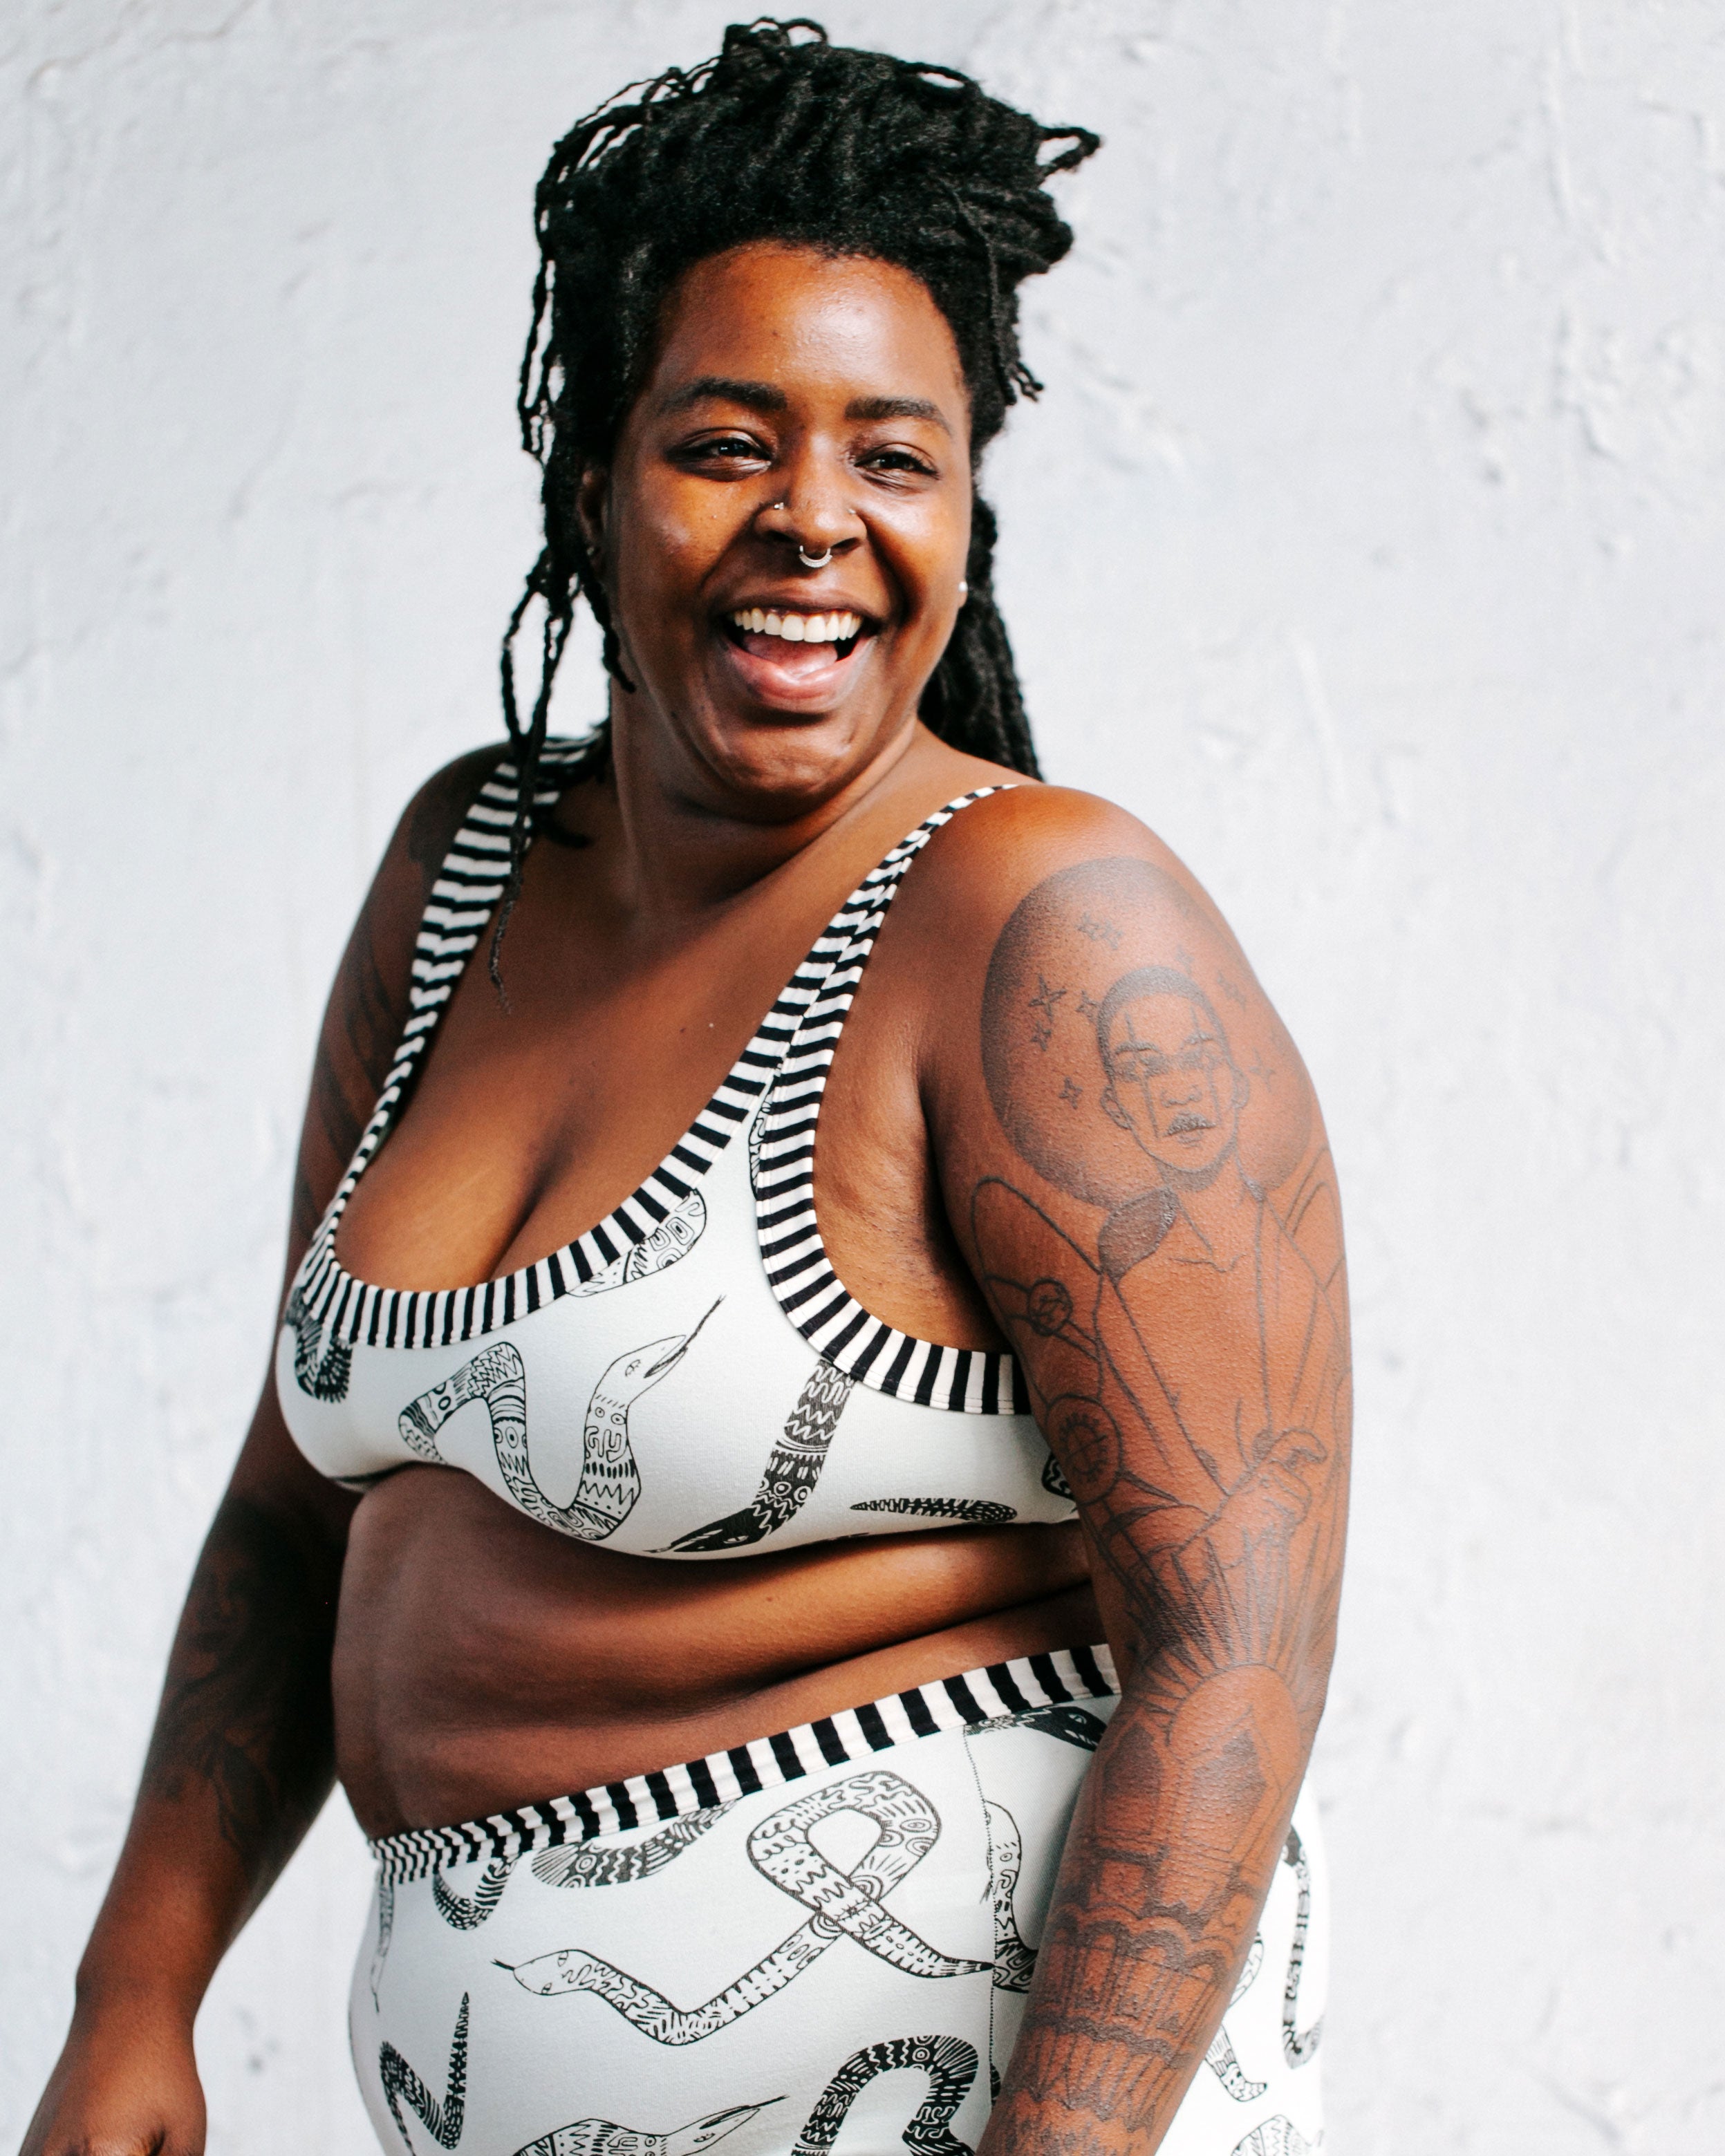 Model smiling at the camera while wearing Thunderpants organic cotton Bralette and Original style underwear in our Sketchy Snakes print: sage color with black sketched snakes and black and white stripe binding.